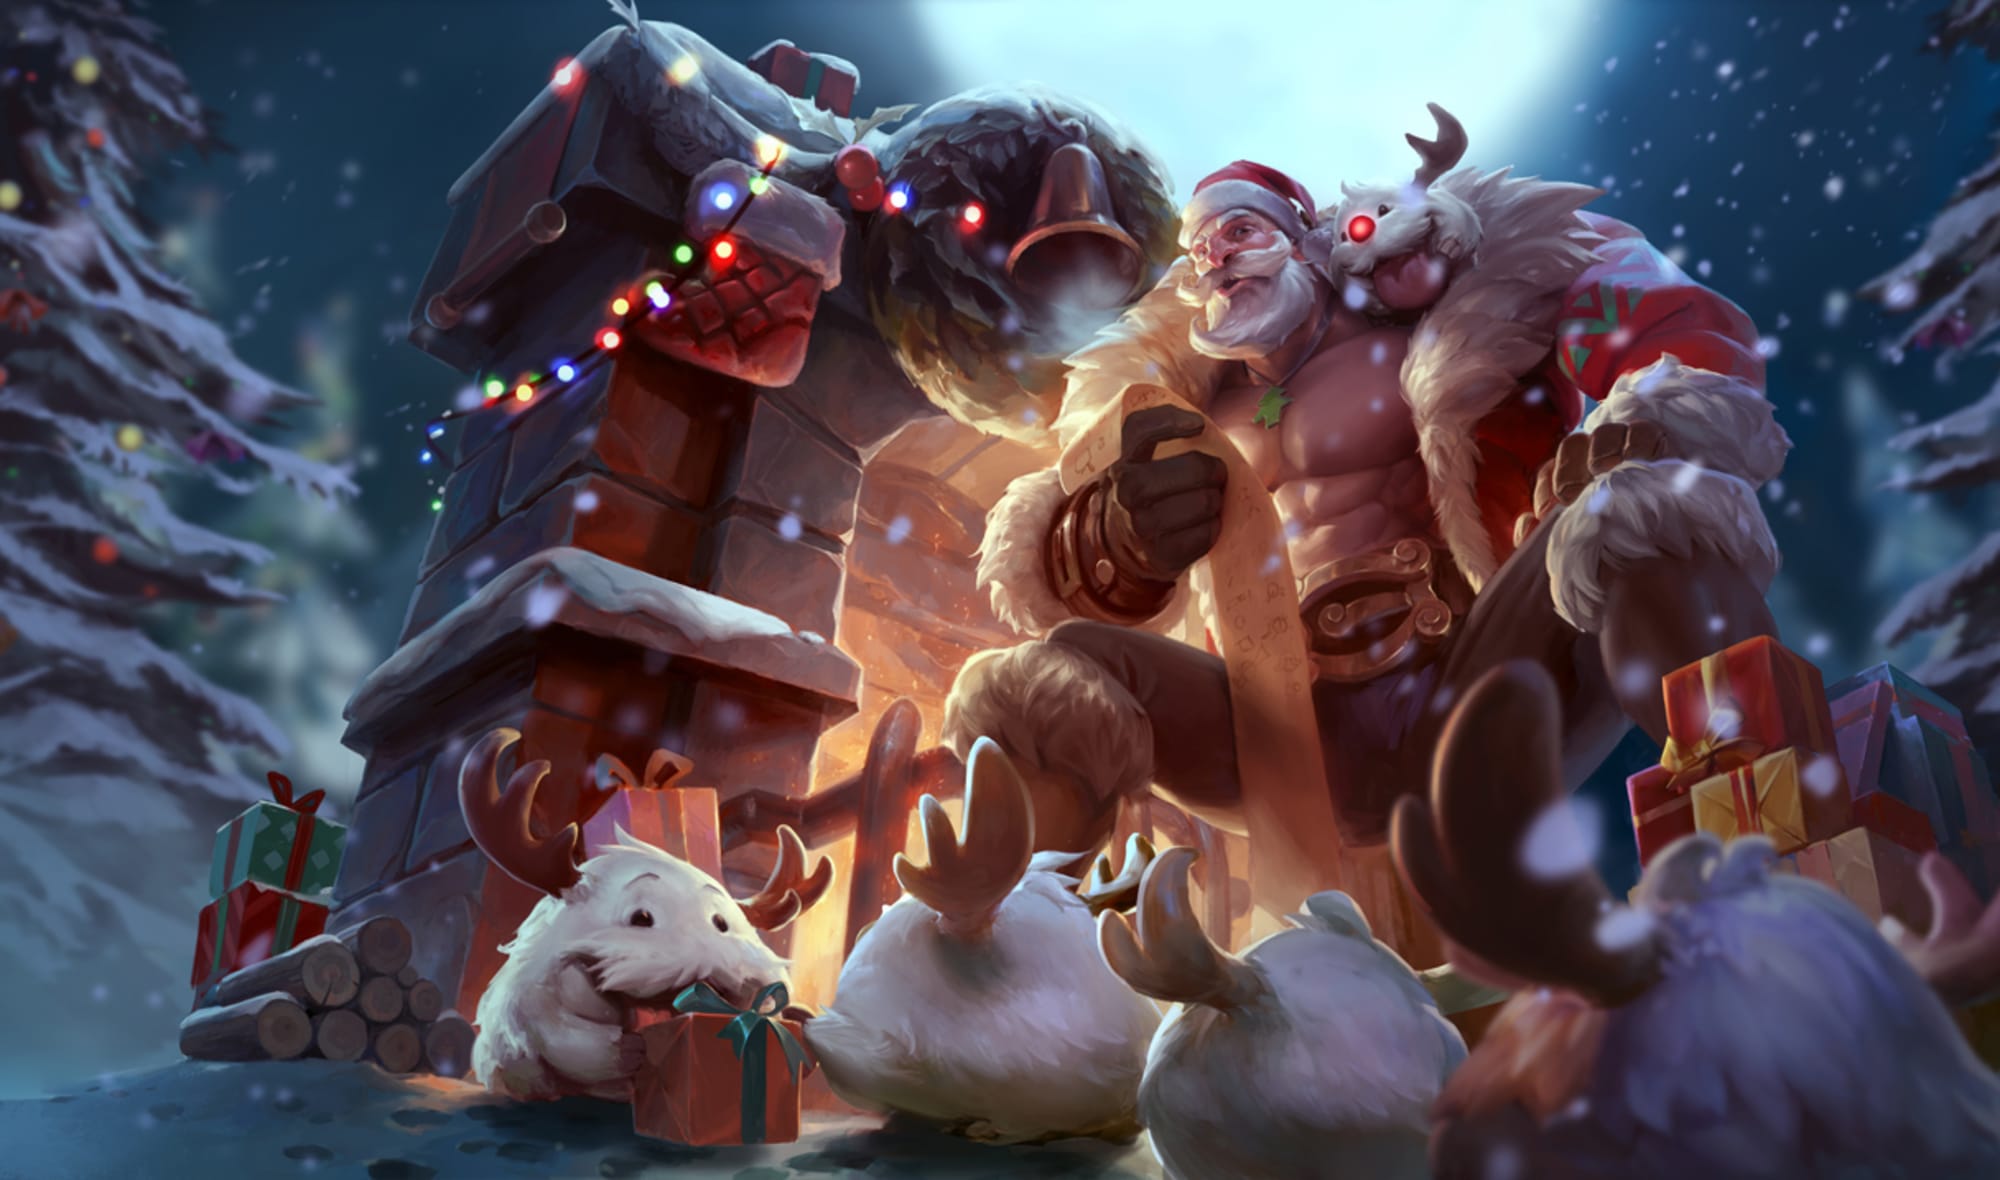 Voksen Forvent det Information League of Legends: The excitement of playing Legend of the Poro King